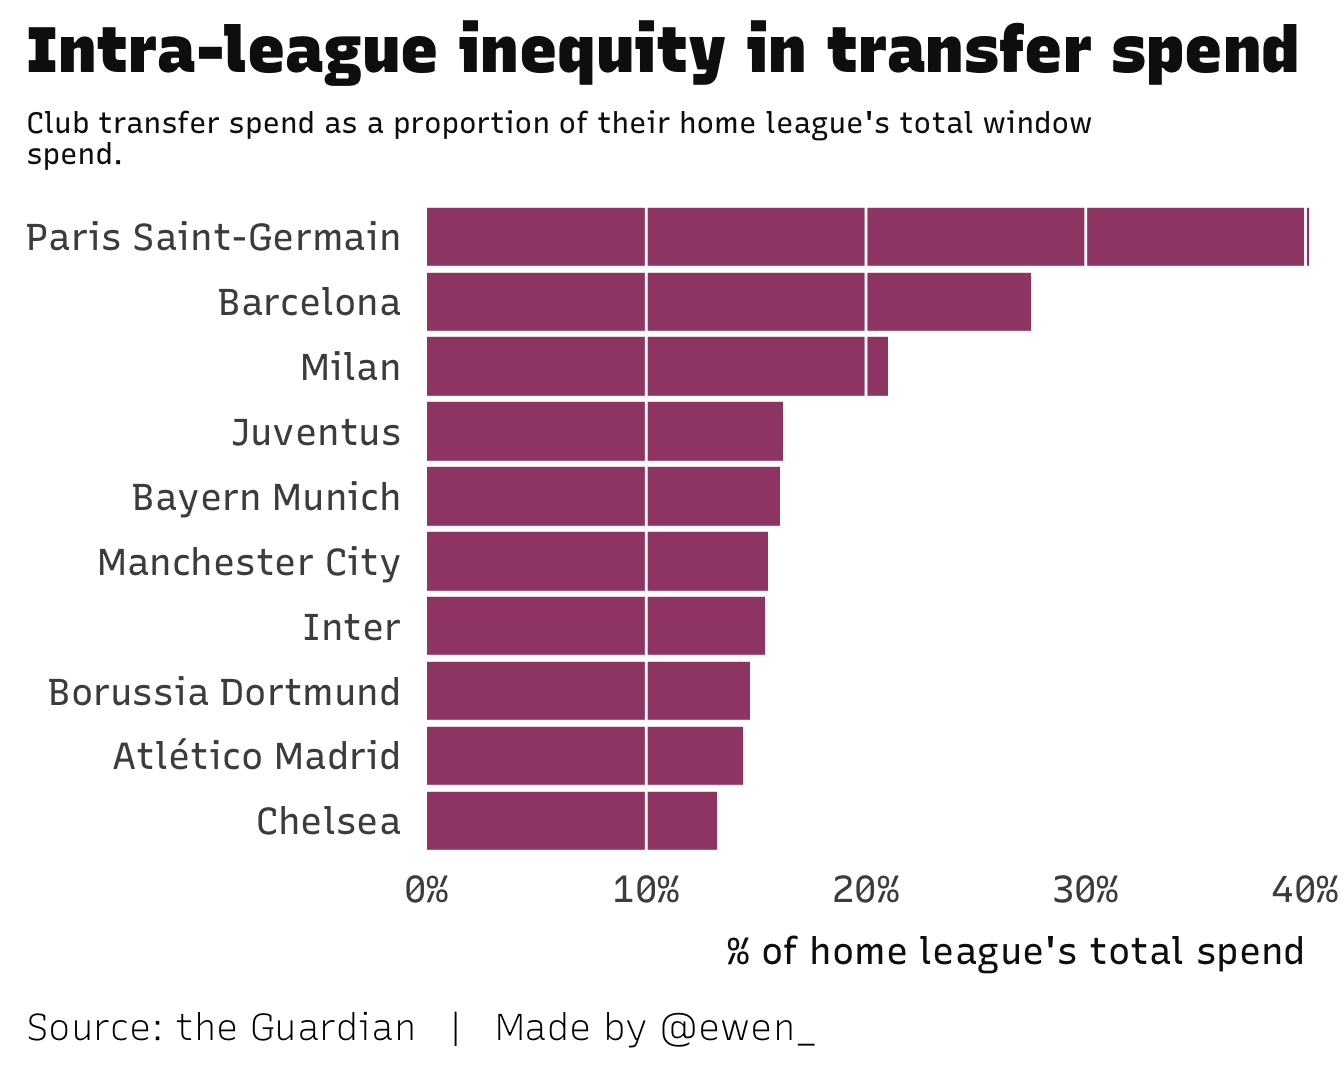 Chart showing top clubs' transfer spend as proportion of their league's total spend